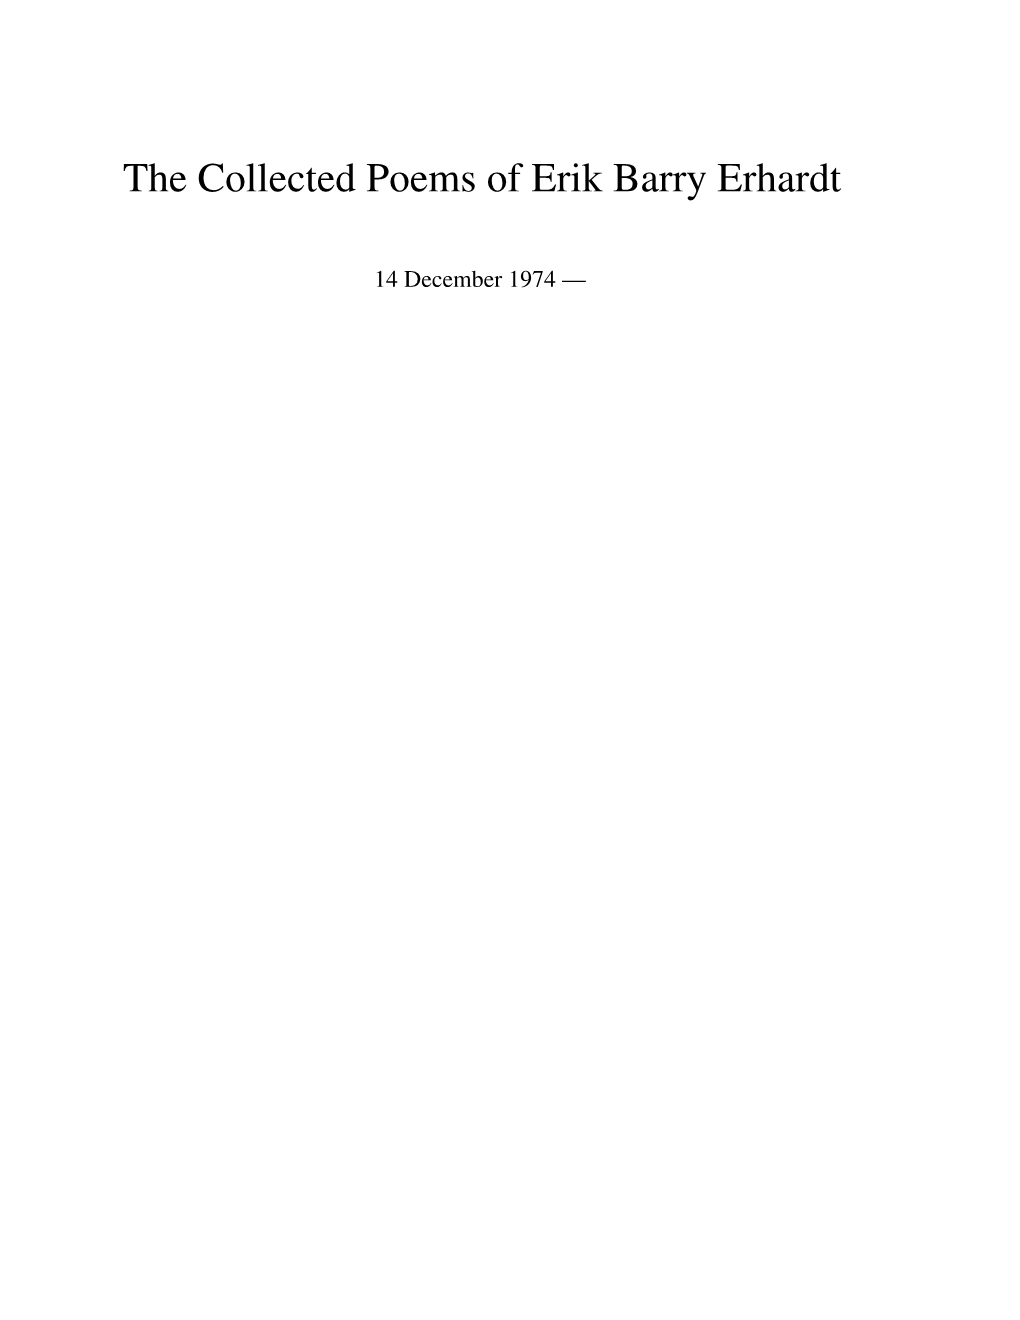 The Collected Poems of Erik Barry Erhardt